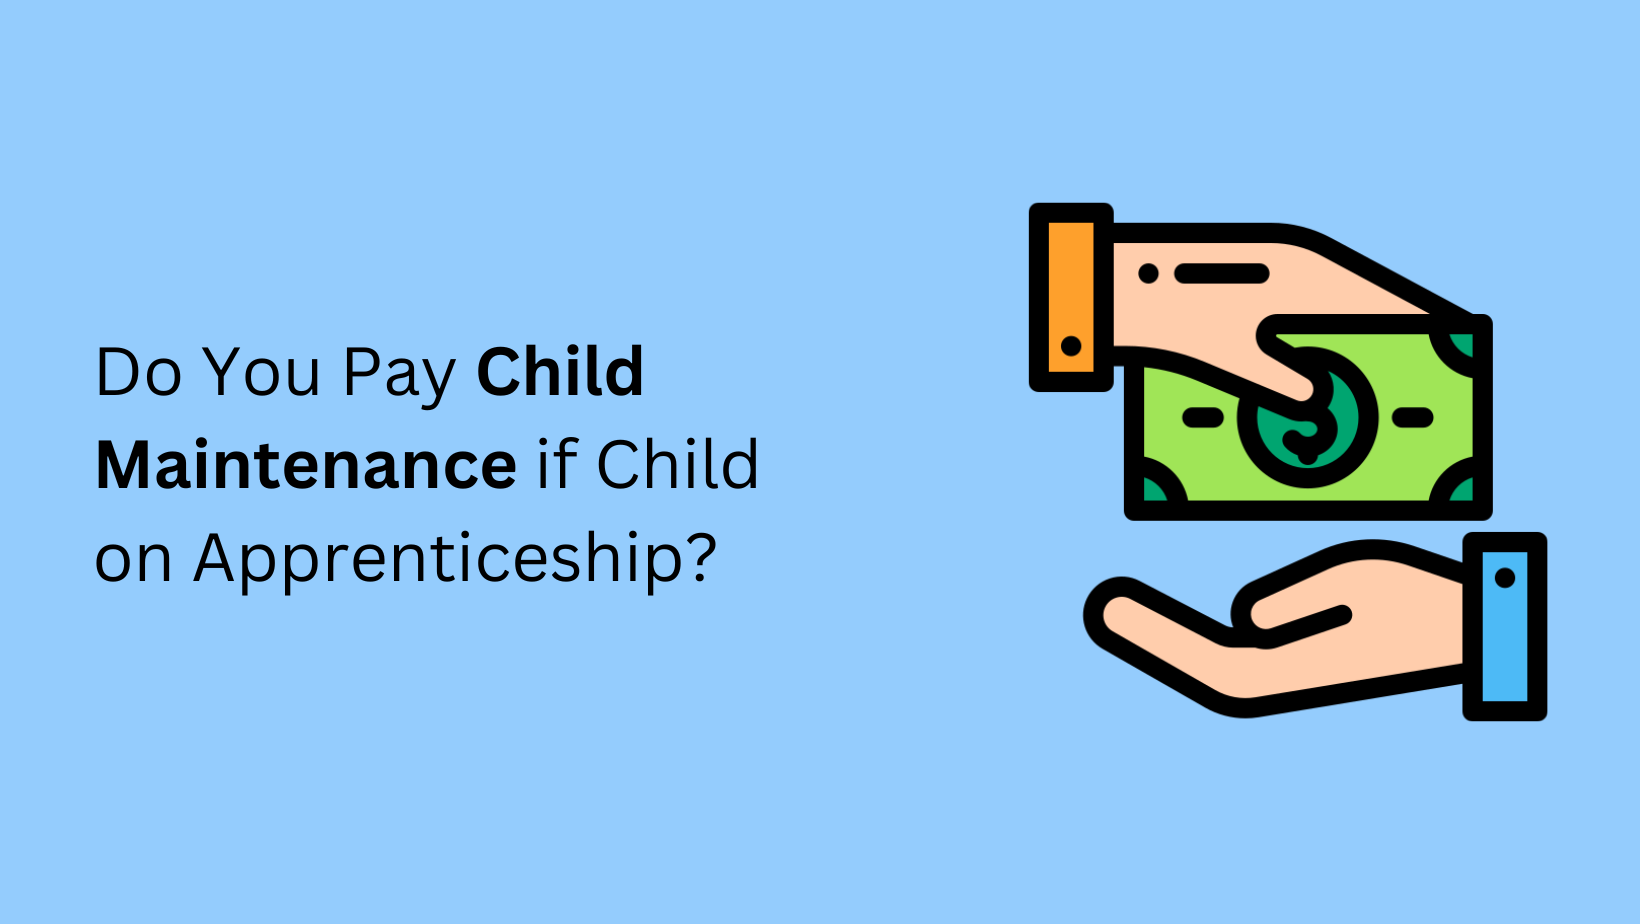 Do You Pay Child Maintenance if Child on Apprenticeship